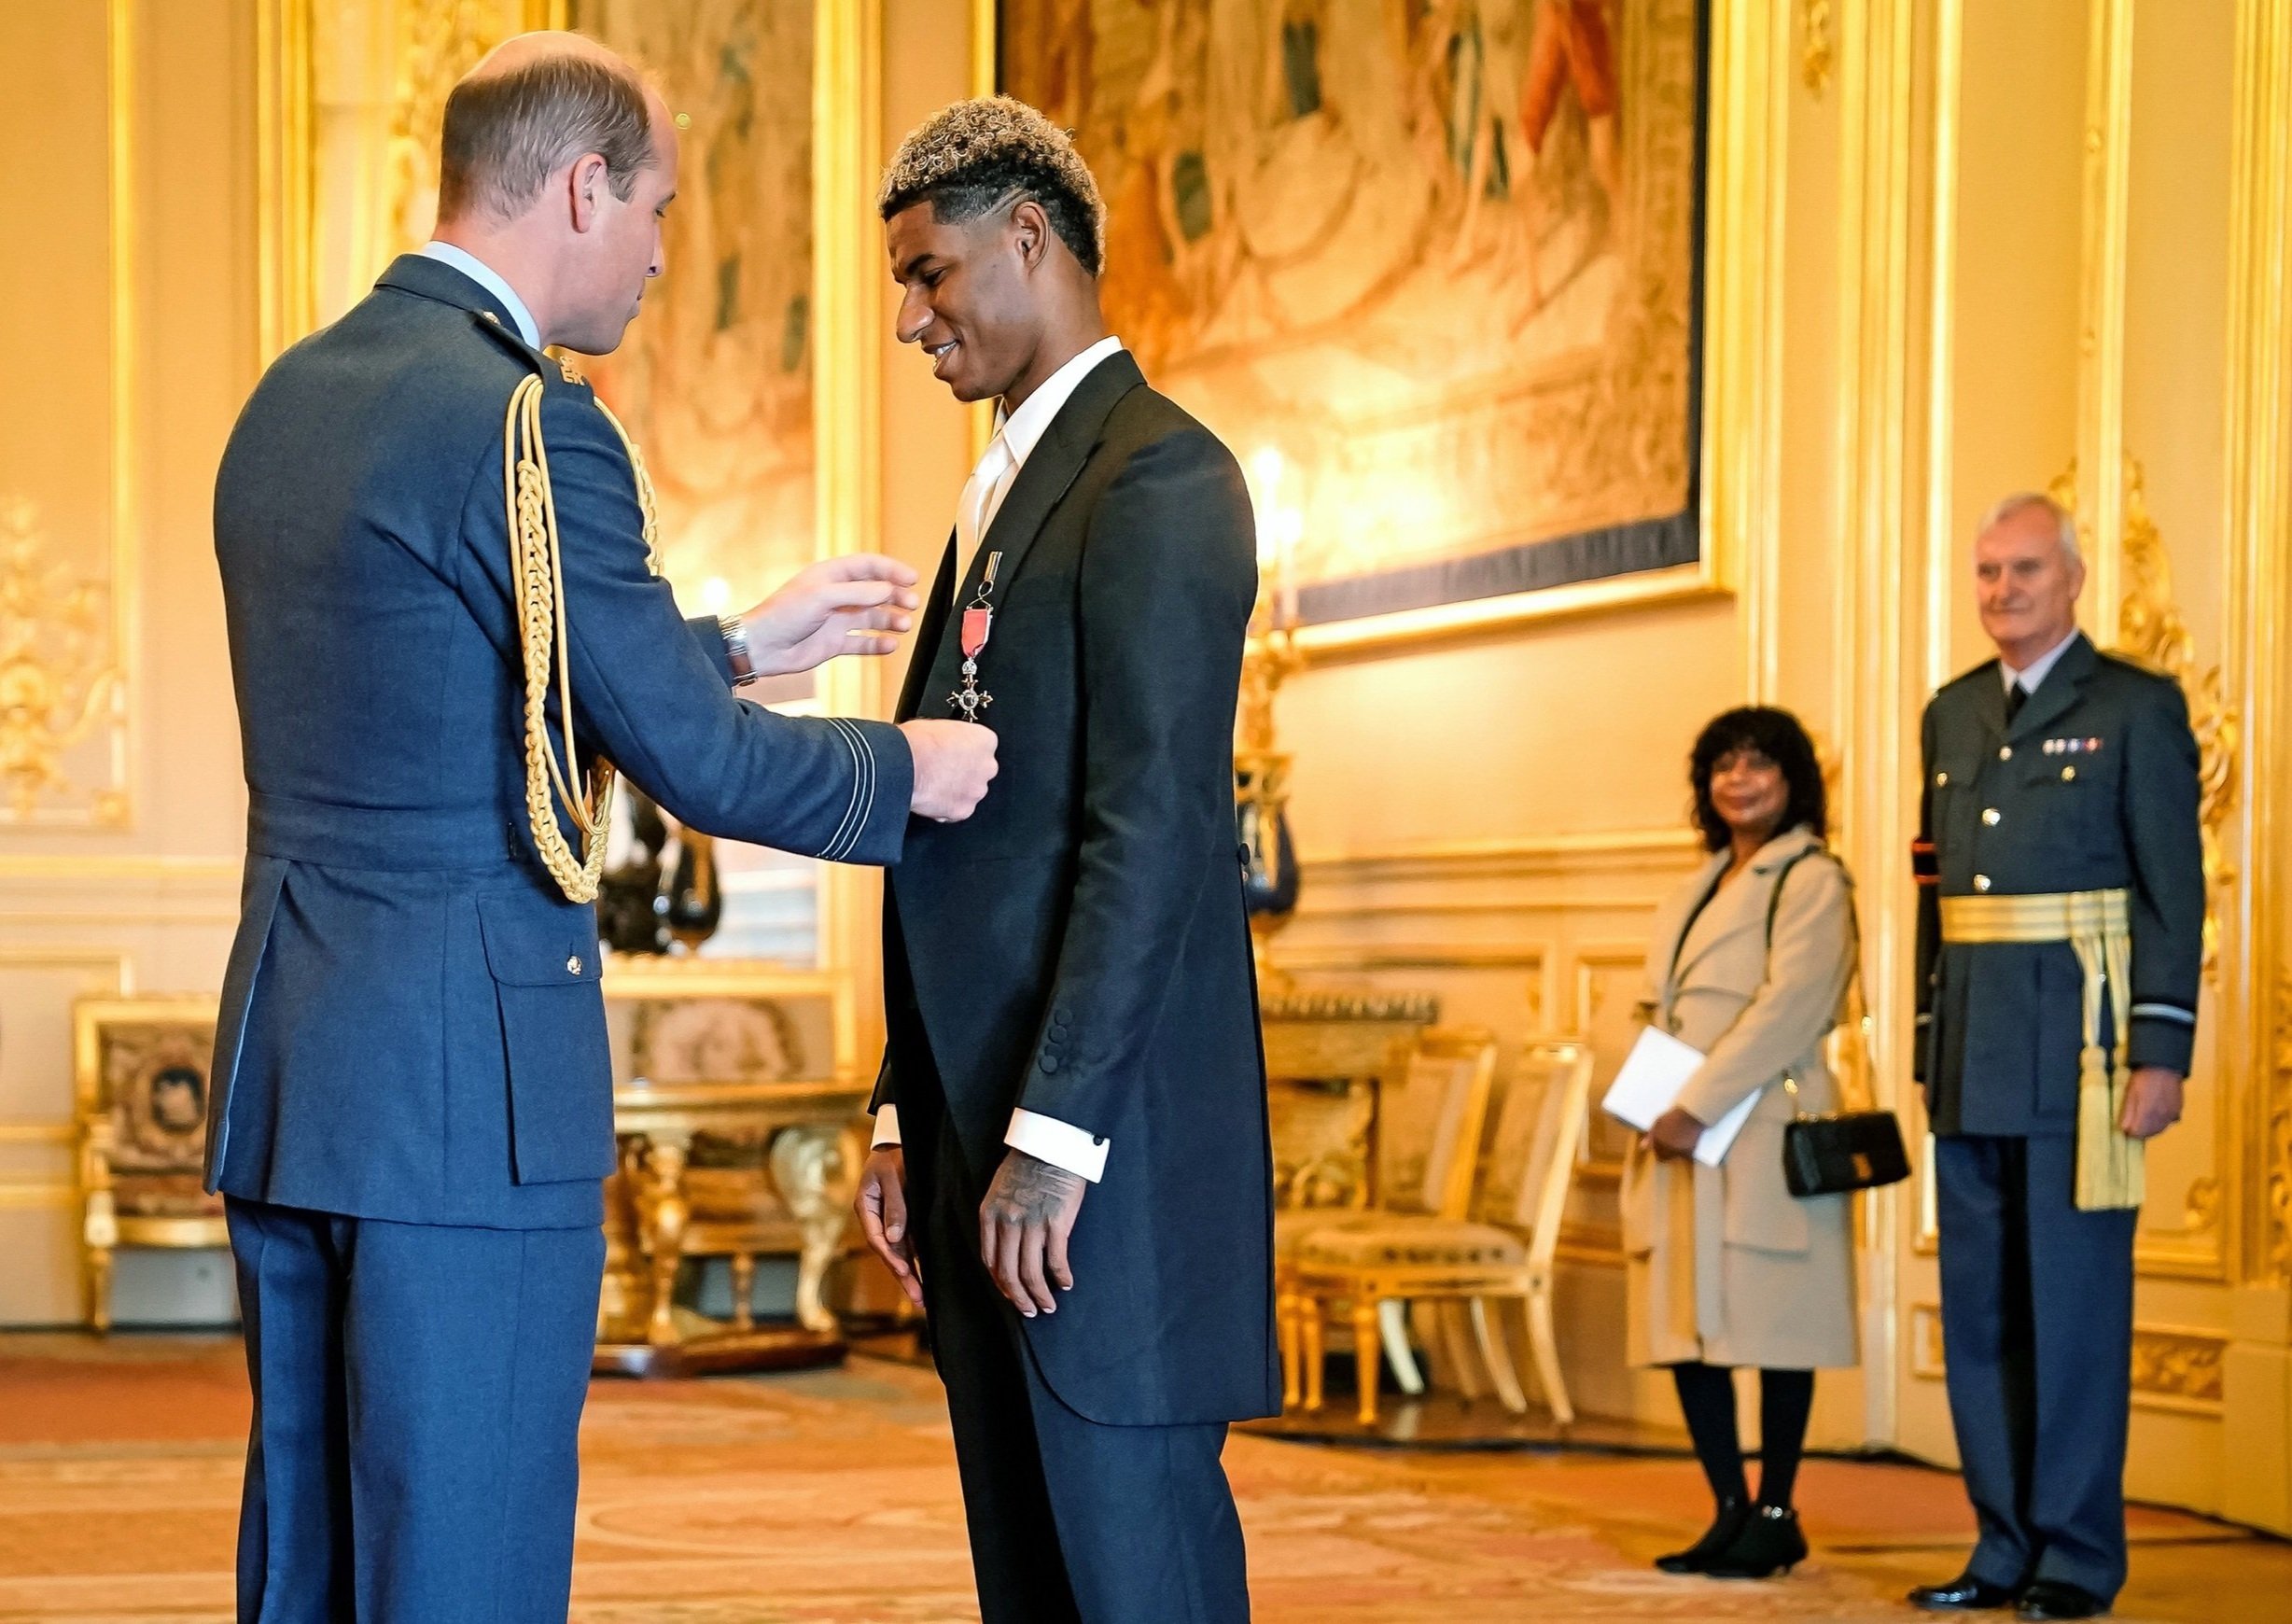  Footballer Marcus Rashford is made an MBE (Member of the Order of the British Empire) for services to vulnerable children in the UK during the coronavirus (COVID-19) pandemic, by the Duke of Cambridge as his mother, Melanie Rashford watches on durin